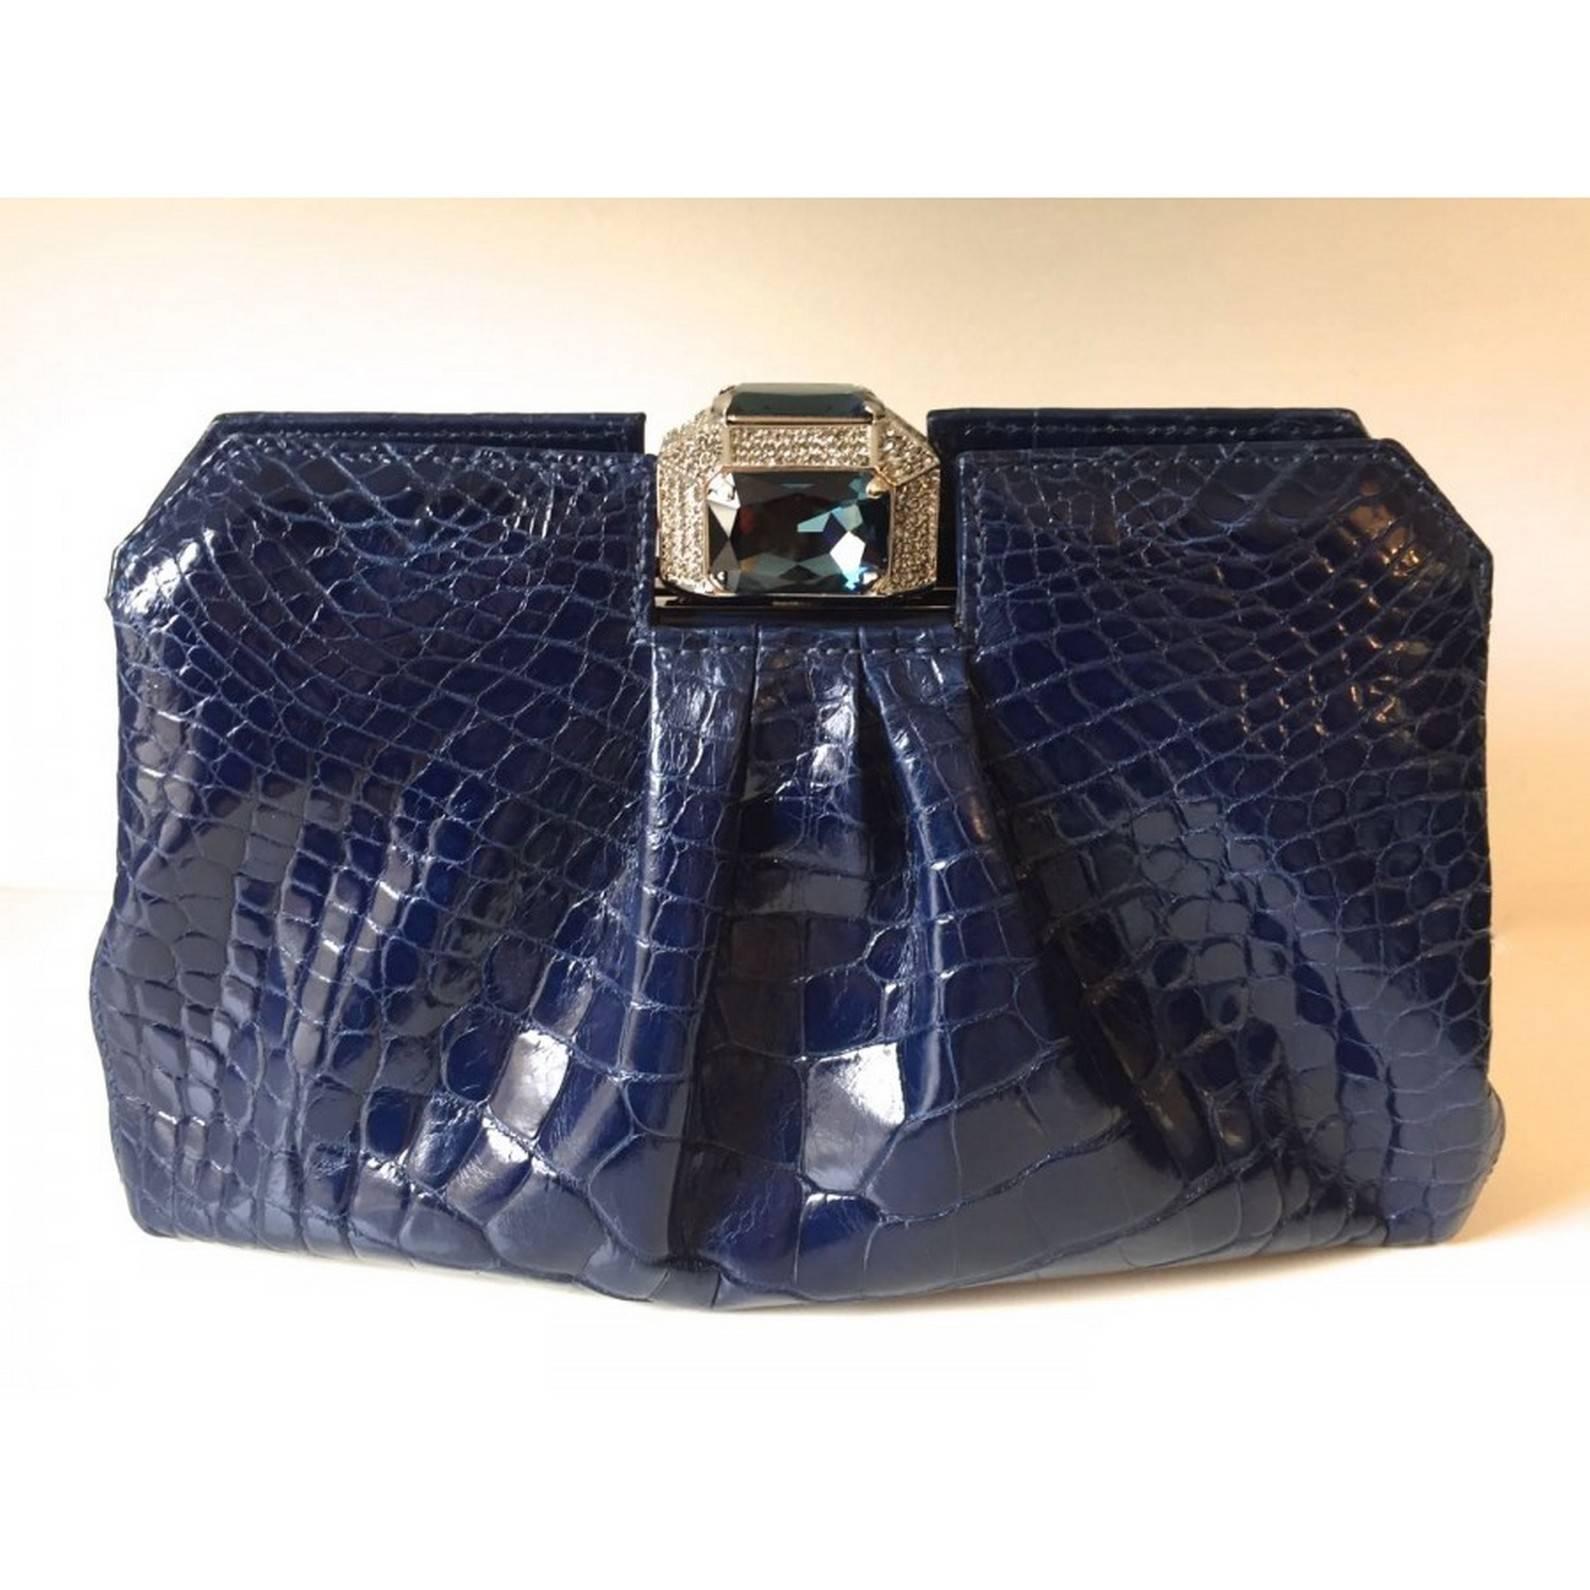 MAGNIFIC Clutch or Evening Bag Valentino 
Alligator blue 
Métal silver
Crystals Swarovski
 Amovible métal strap 
 Dimensions : 25 cm x 16 cm x 8 cm
Sorry no box , no dust bag 
INTERNATIONALS BUYERS CUSTOMS DUTIES AND TAXES ARE INCLUDED
Thank you for